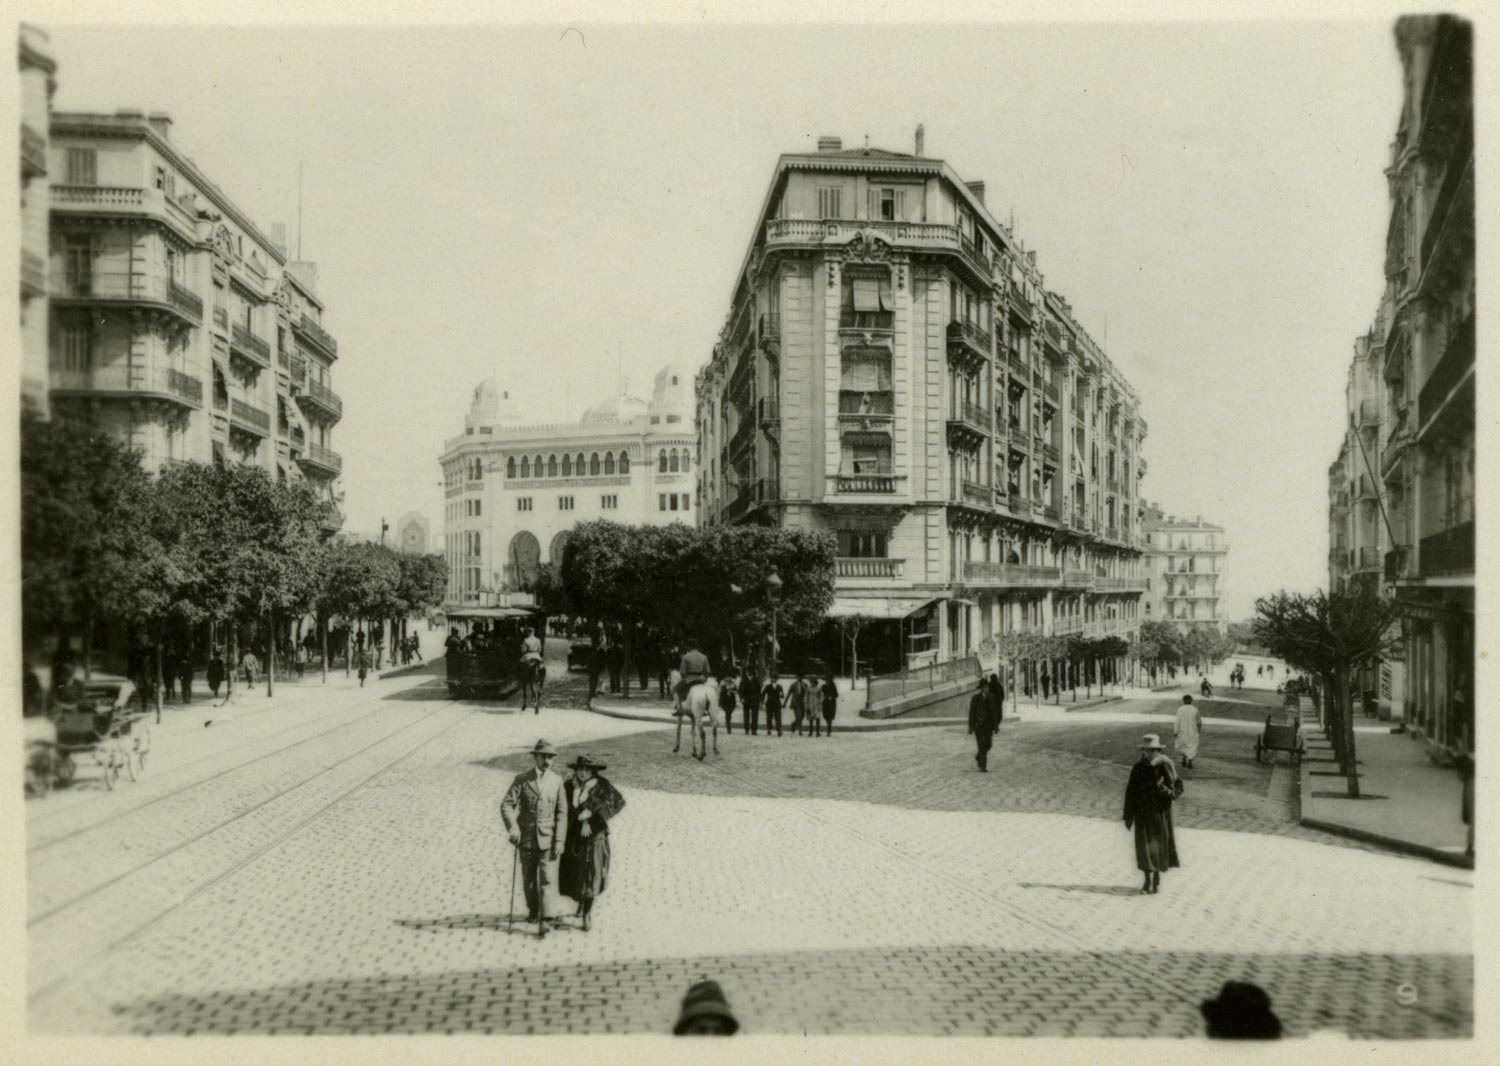 Grande Poste d'Alger - General view of the square at r<span style="color: rgb(0, 0, 0);">ue Michelet at la Poste</span>